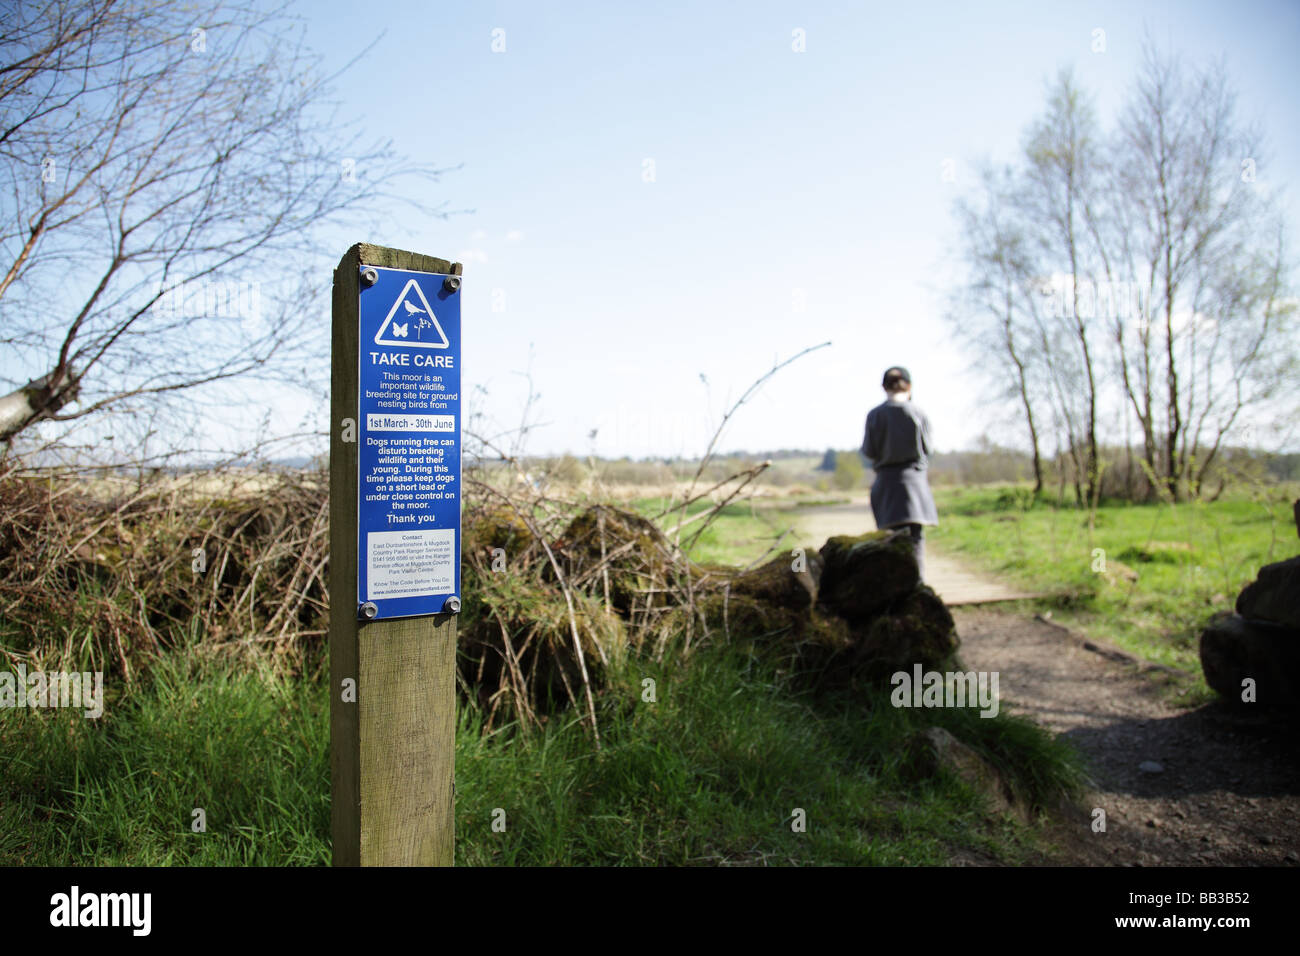 Ground nesting birds protection sign asking owners to keep dogs under control, Mugdock Country Park, Scotland, UK Stock Photo